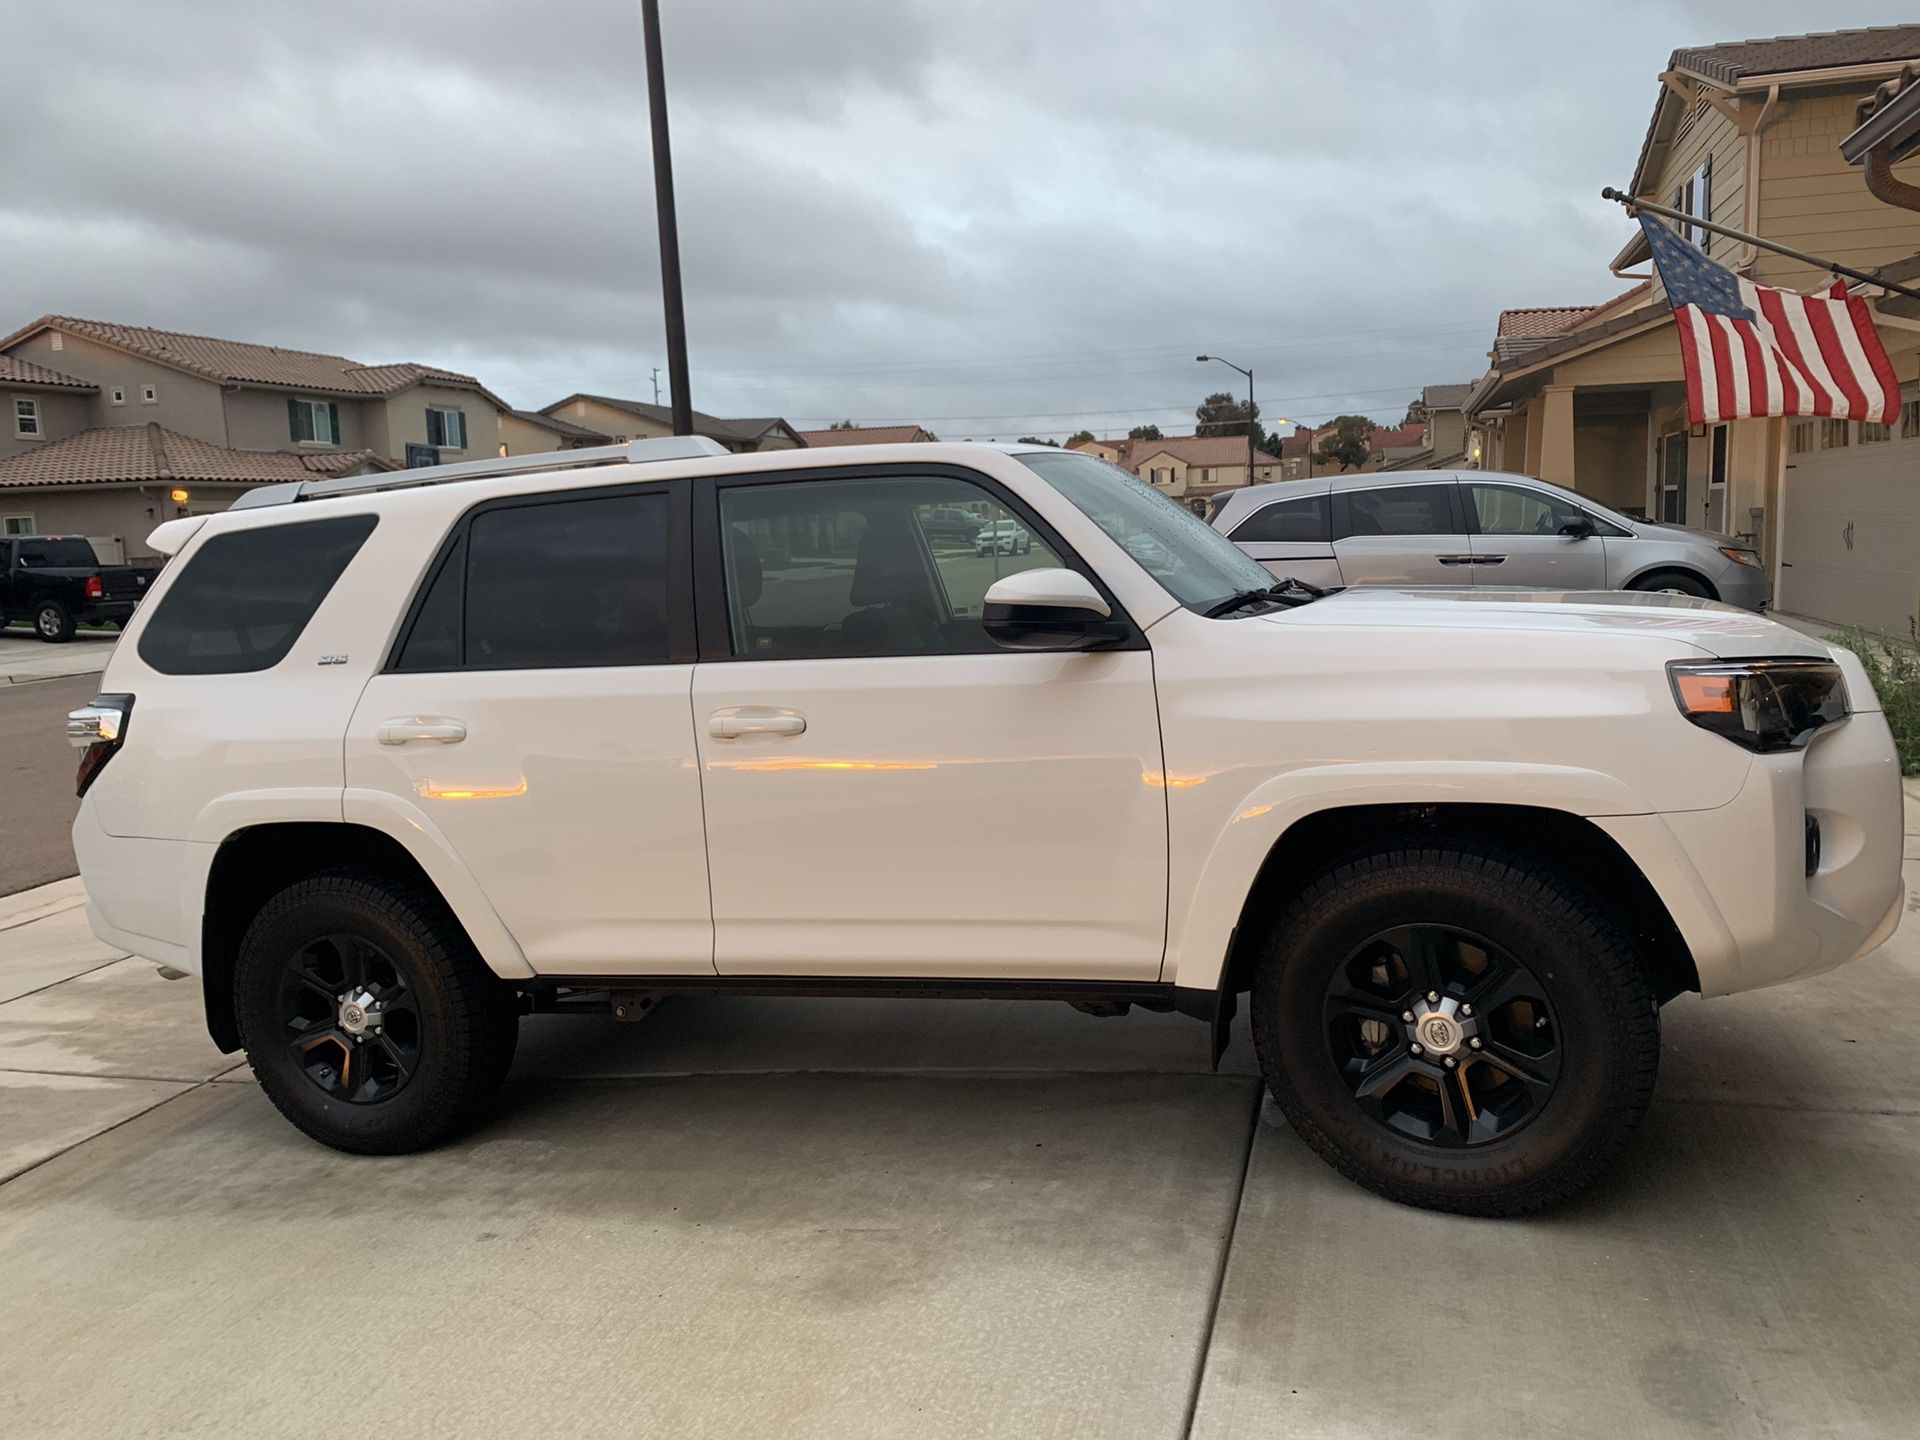 17inch Toyota rims & new tires